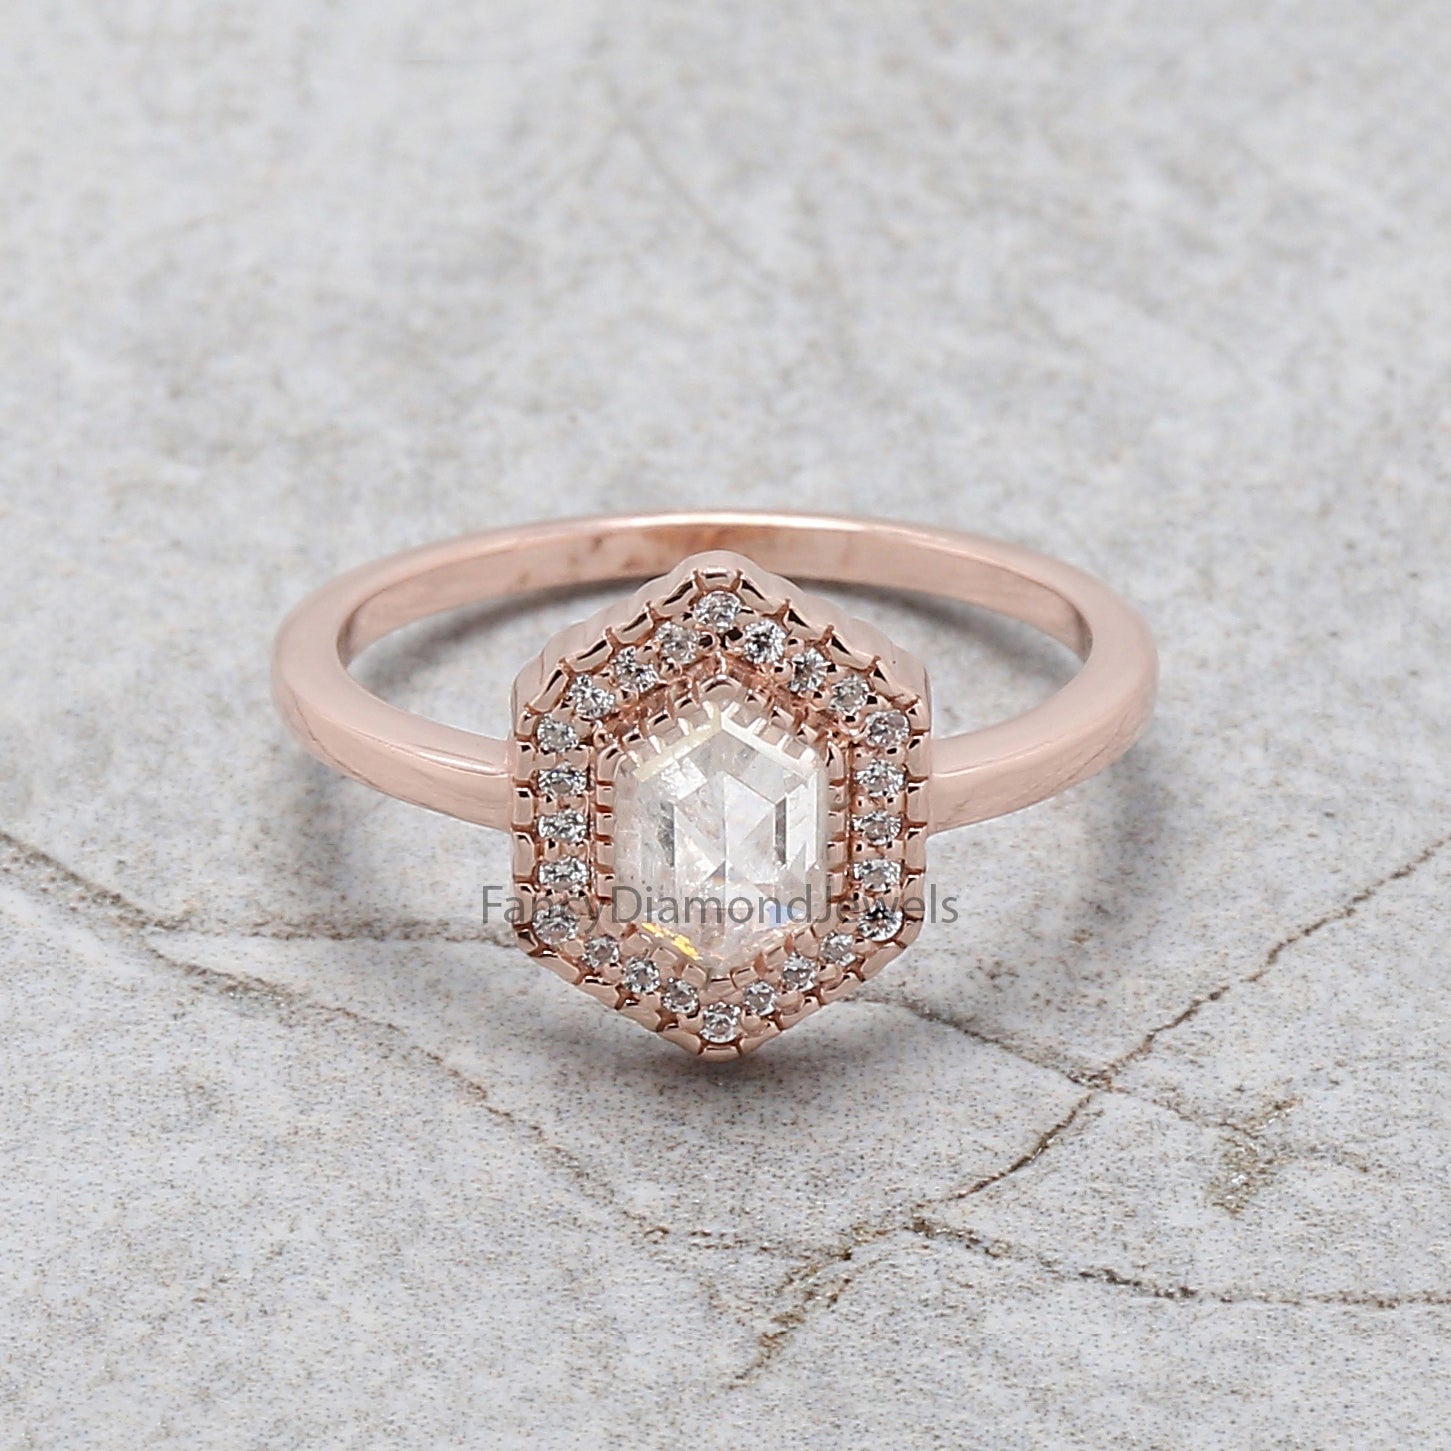 Hexagon Cut Salt And Pepper Diamond Ring 0.79 Ct 6.50 MM Hexagon Diamond Ring 14K Solid Rose Gold Silver Engagement Ring Gift For Her QL2587